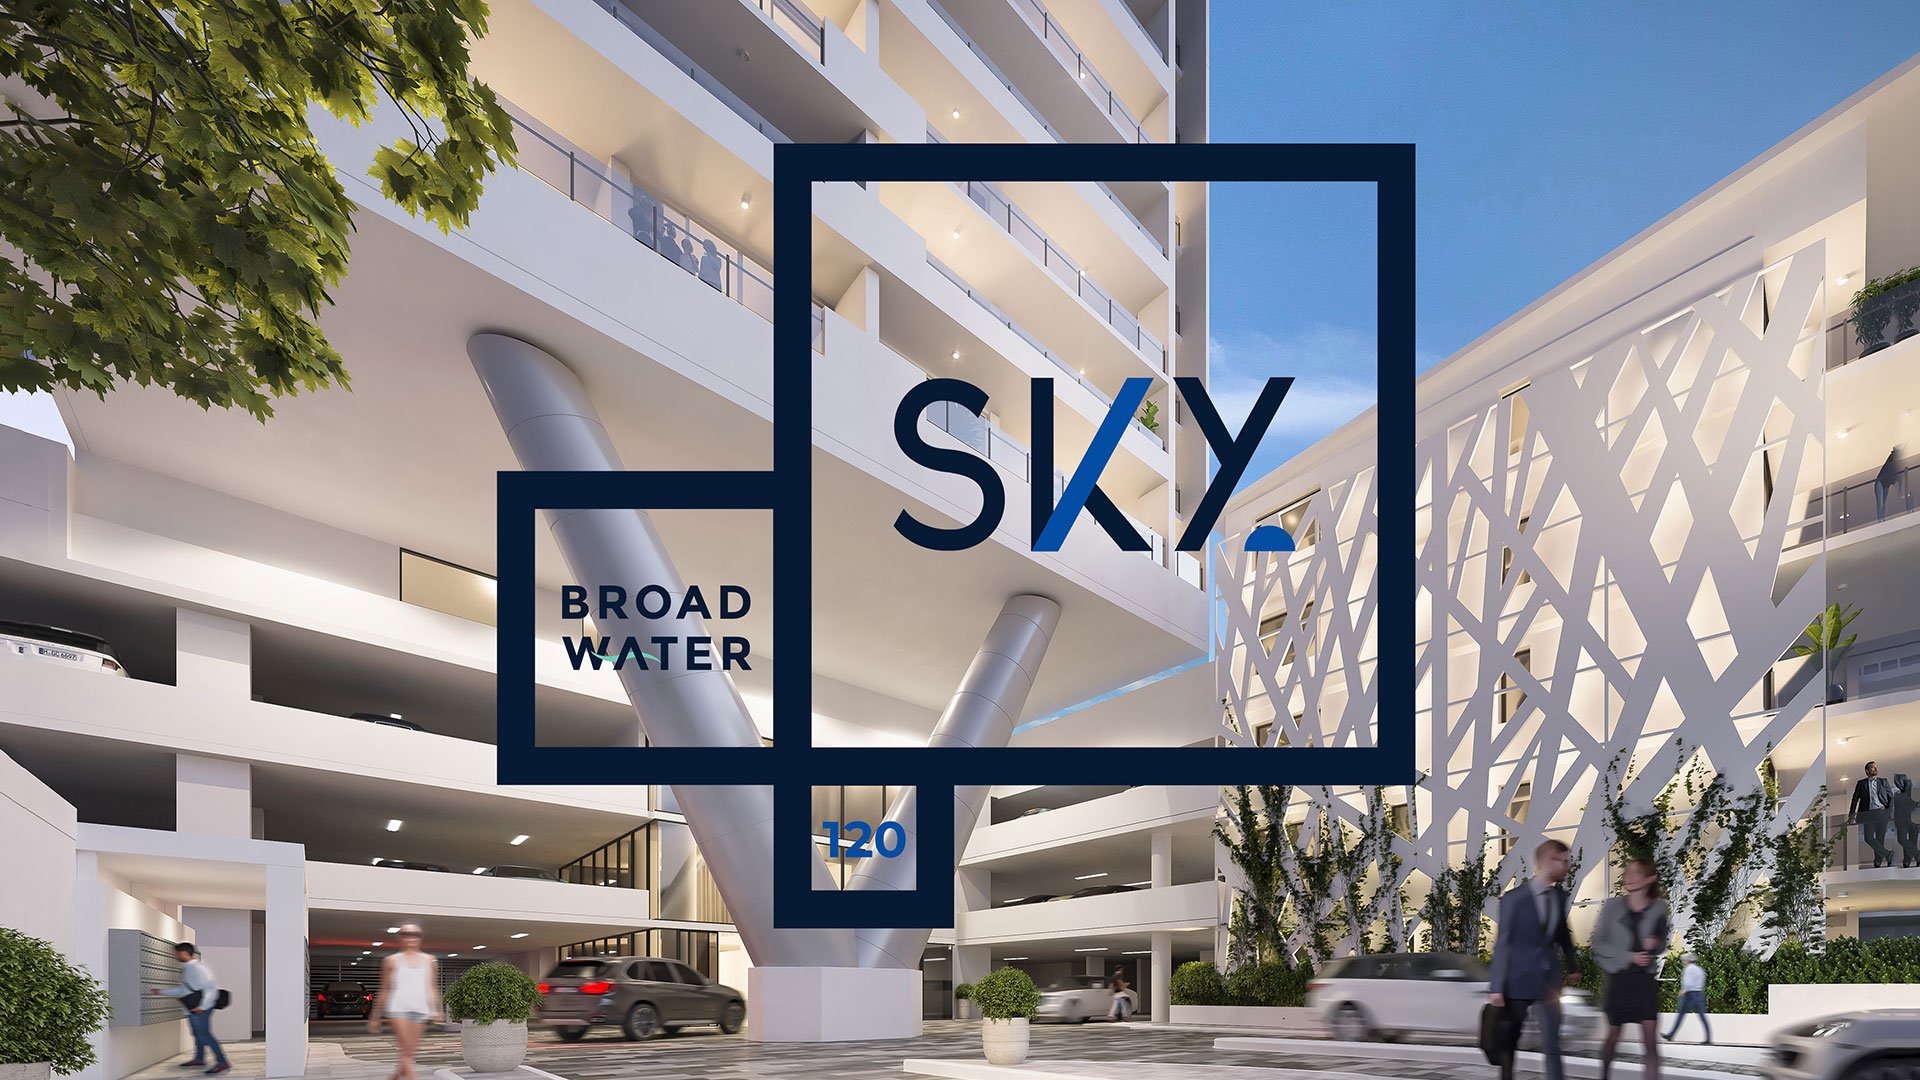 Unit Development 'Sky Broadwater' logo over the building render | Located in Southport, Gold Coast, QLD